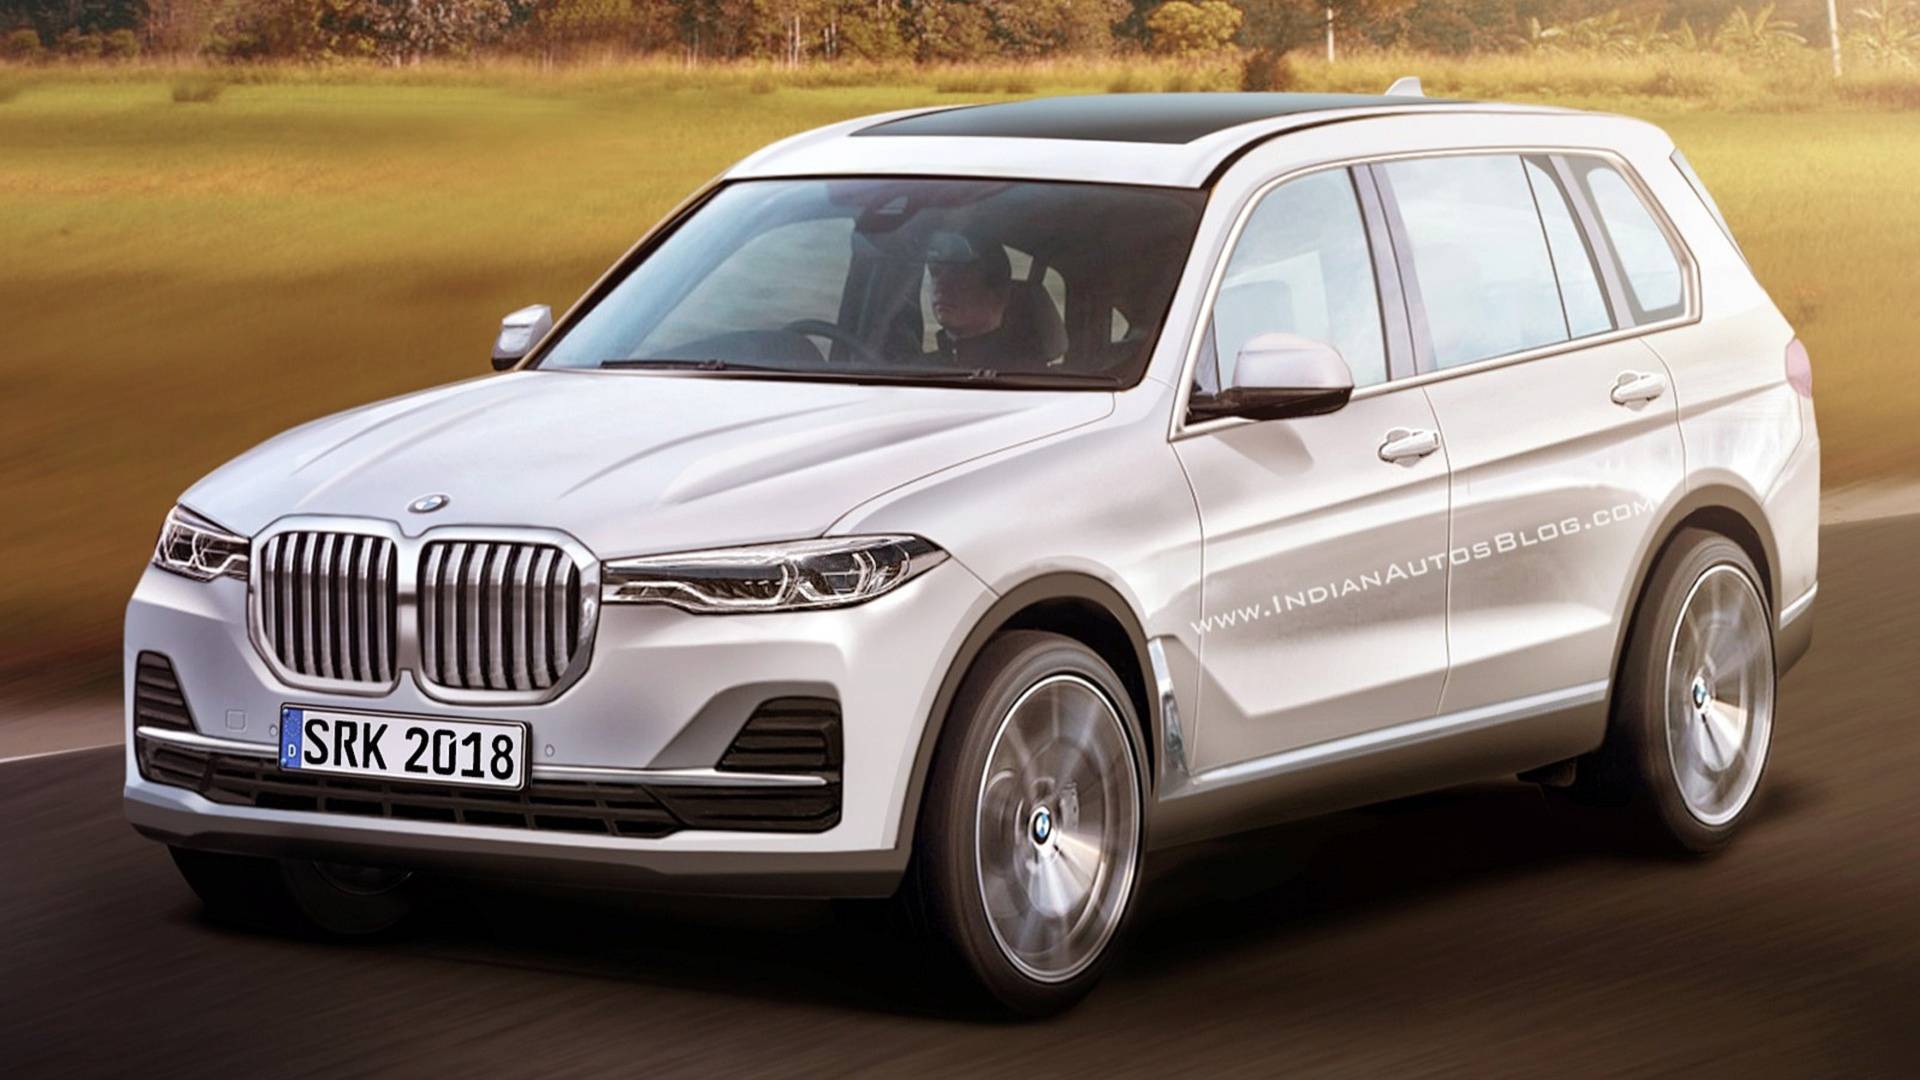 Leaked Bmw X7 Image Transformed Into Realistic Rendering